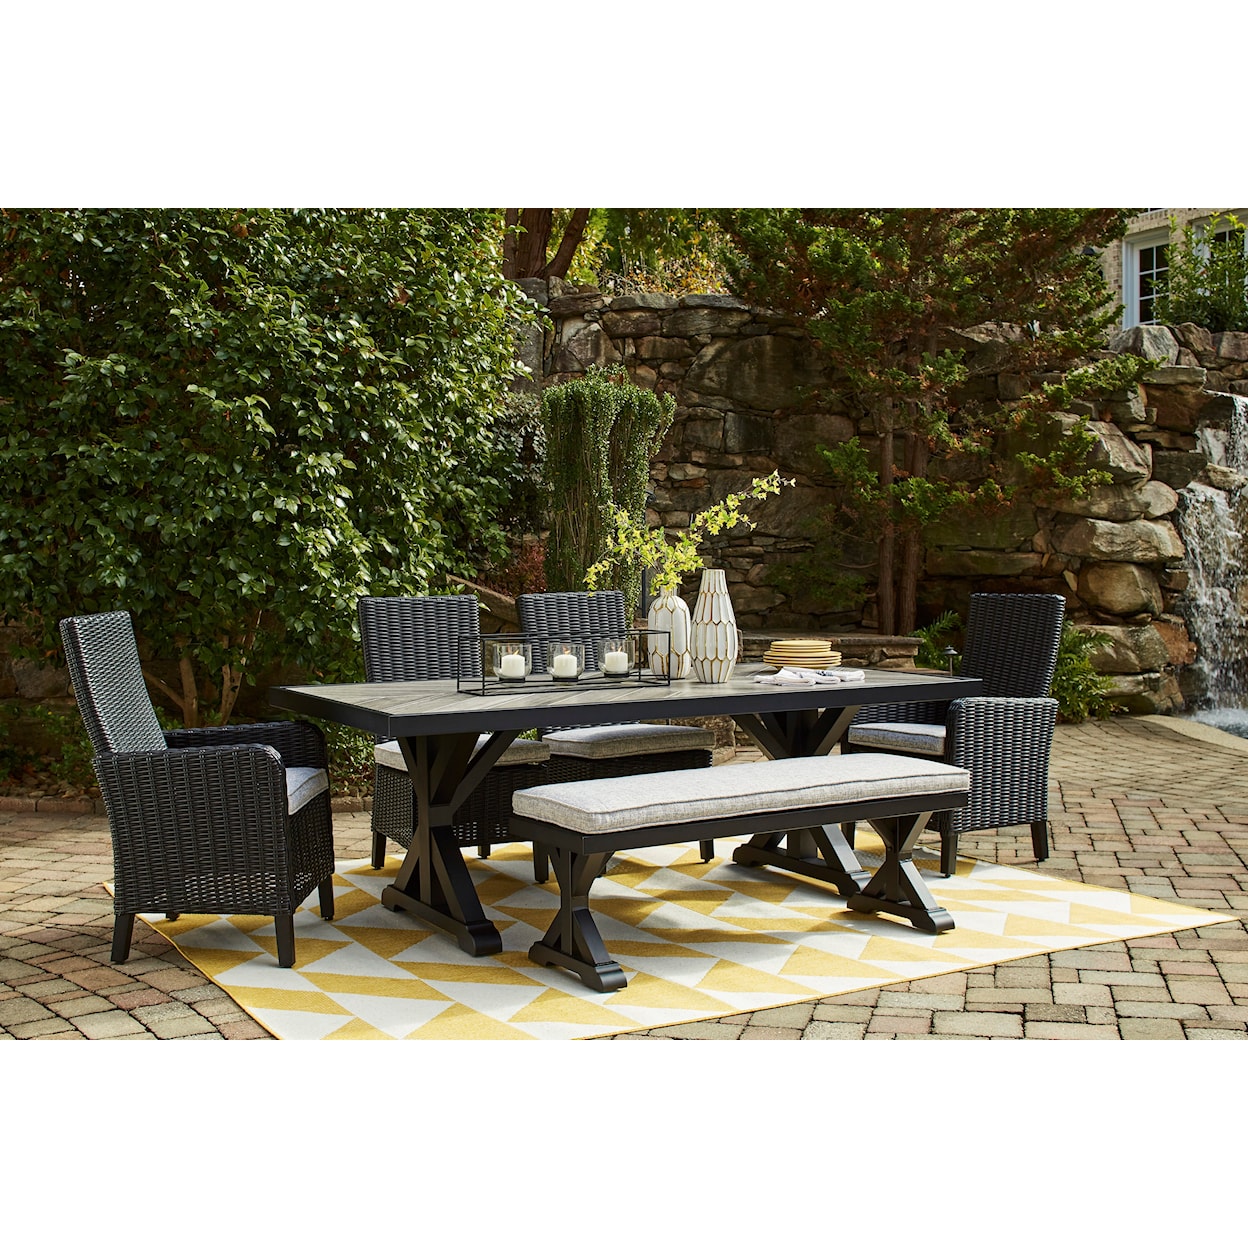 Signature Design by Ashley Beachcroft 6 Piece Outdoor Dining Set